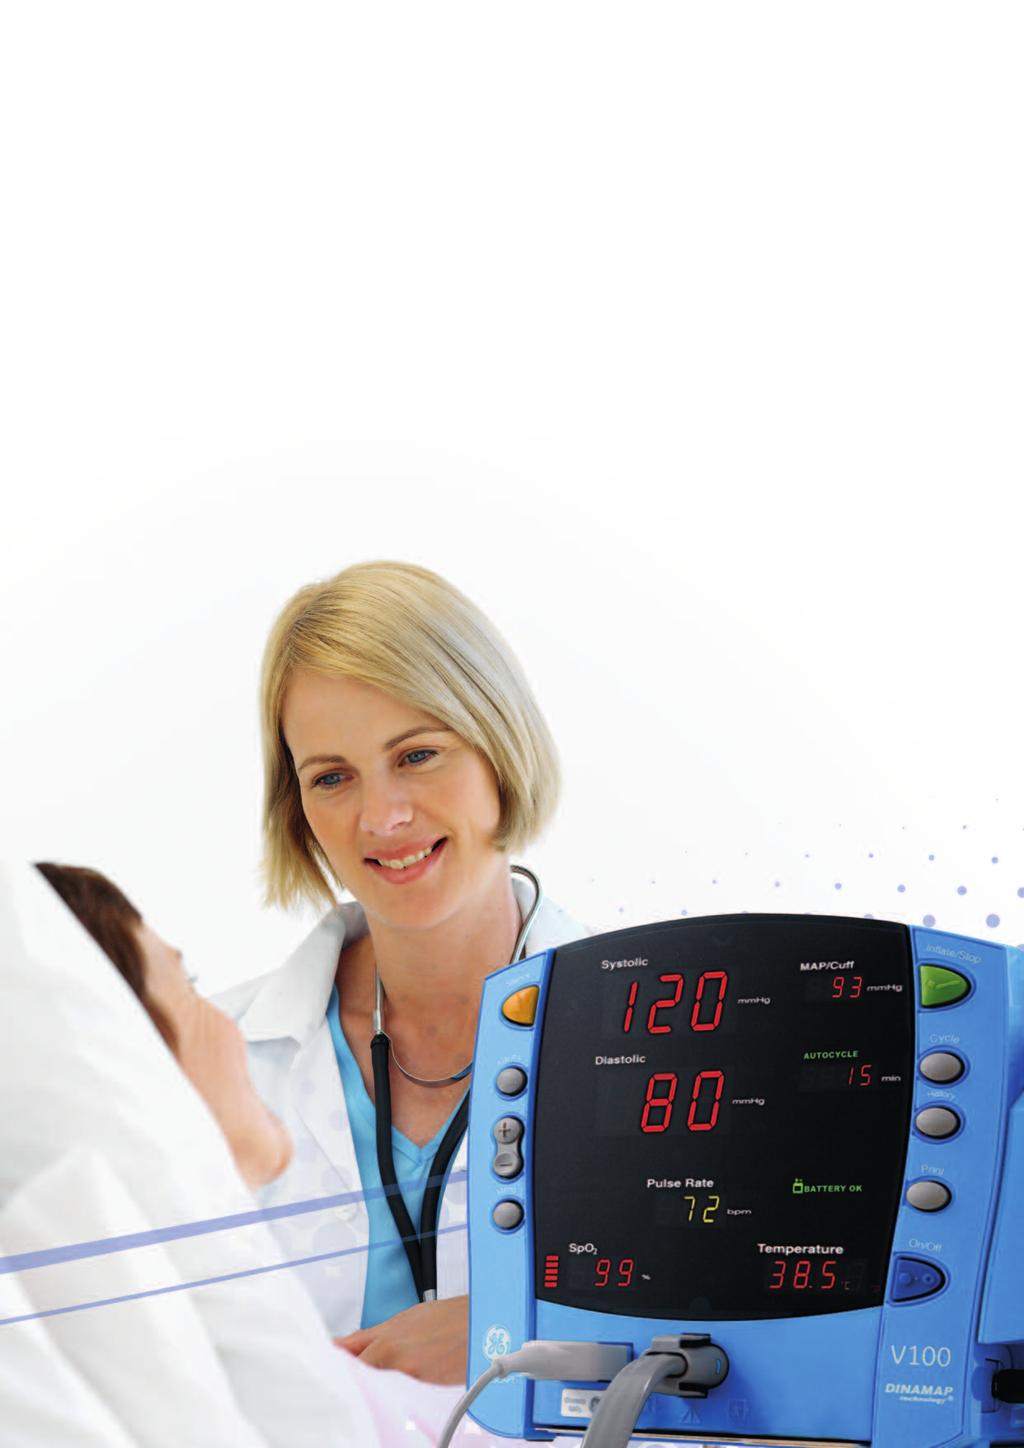 Continued innovation The GE DINAMAP* non-invasive blood pressure (NIBP) monitor is known globally by many clinicians, nurses and biomeds as a quality tool to automatically measure and monitor blood